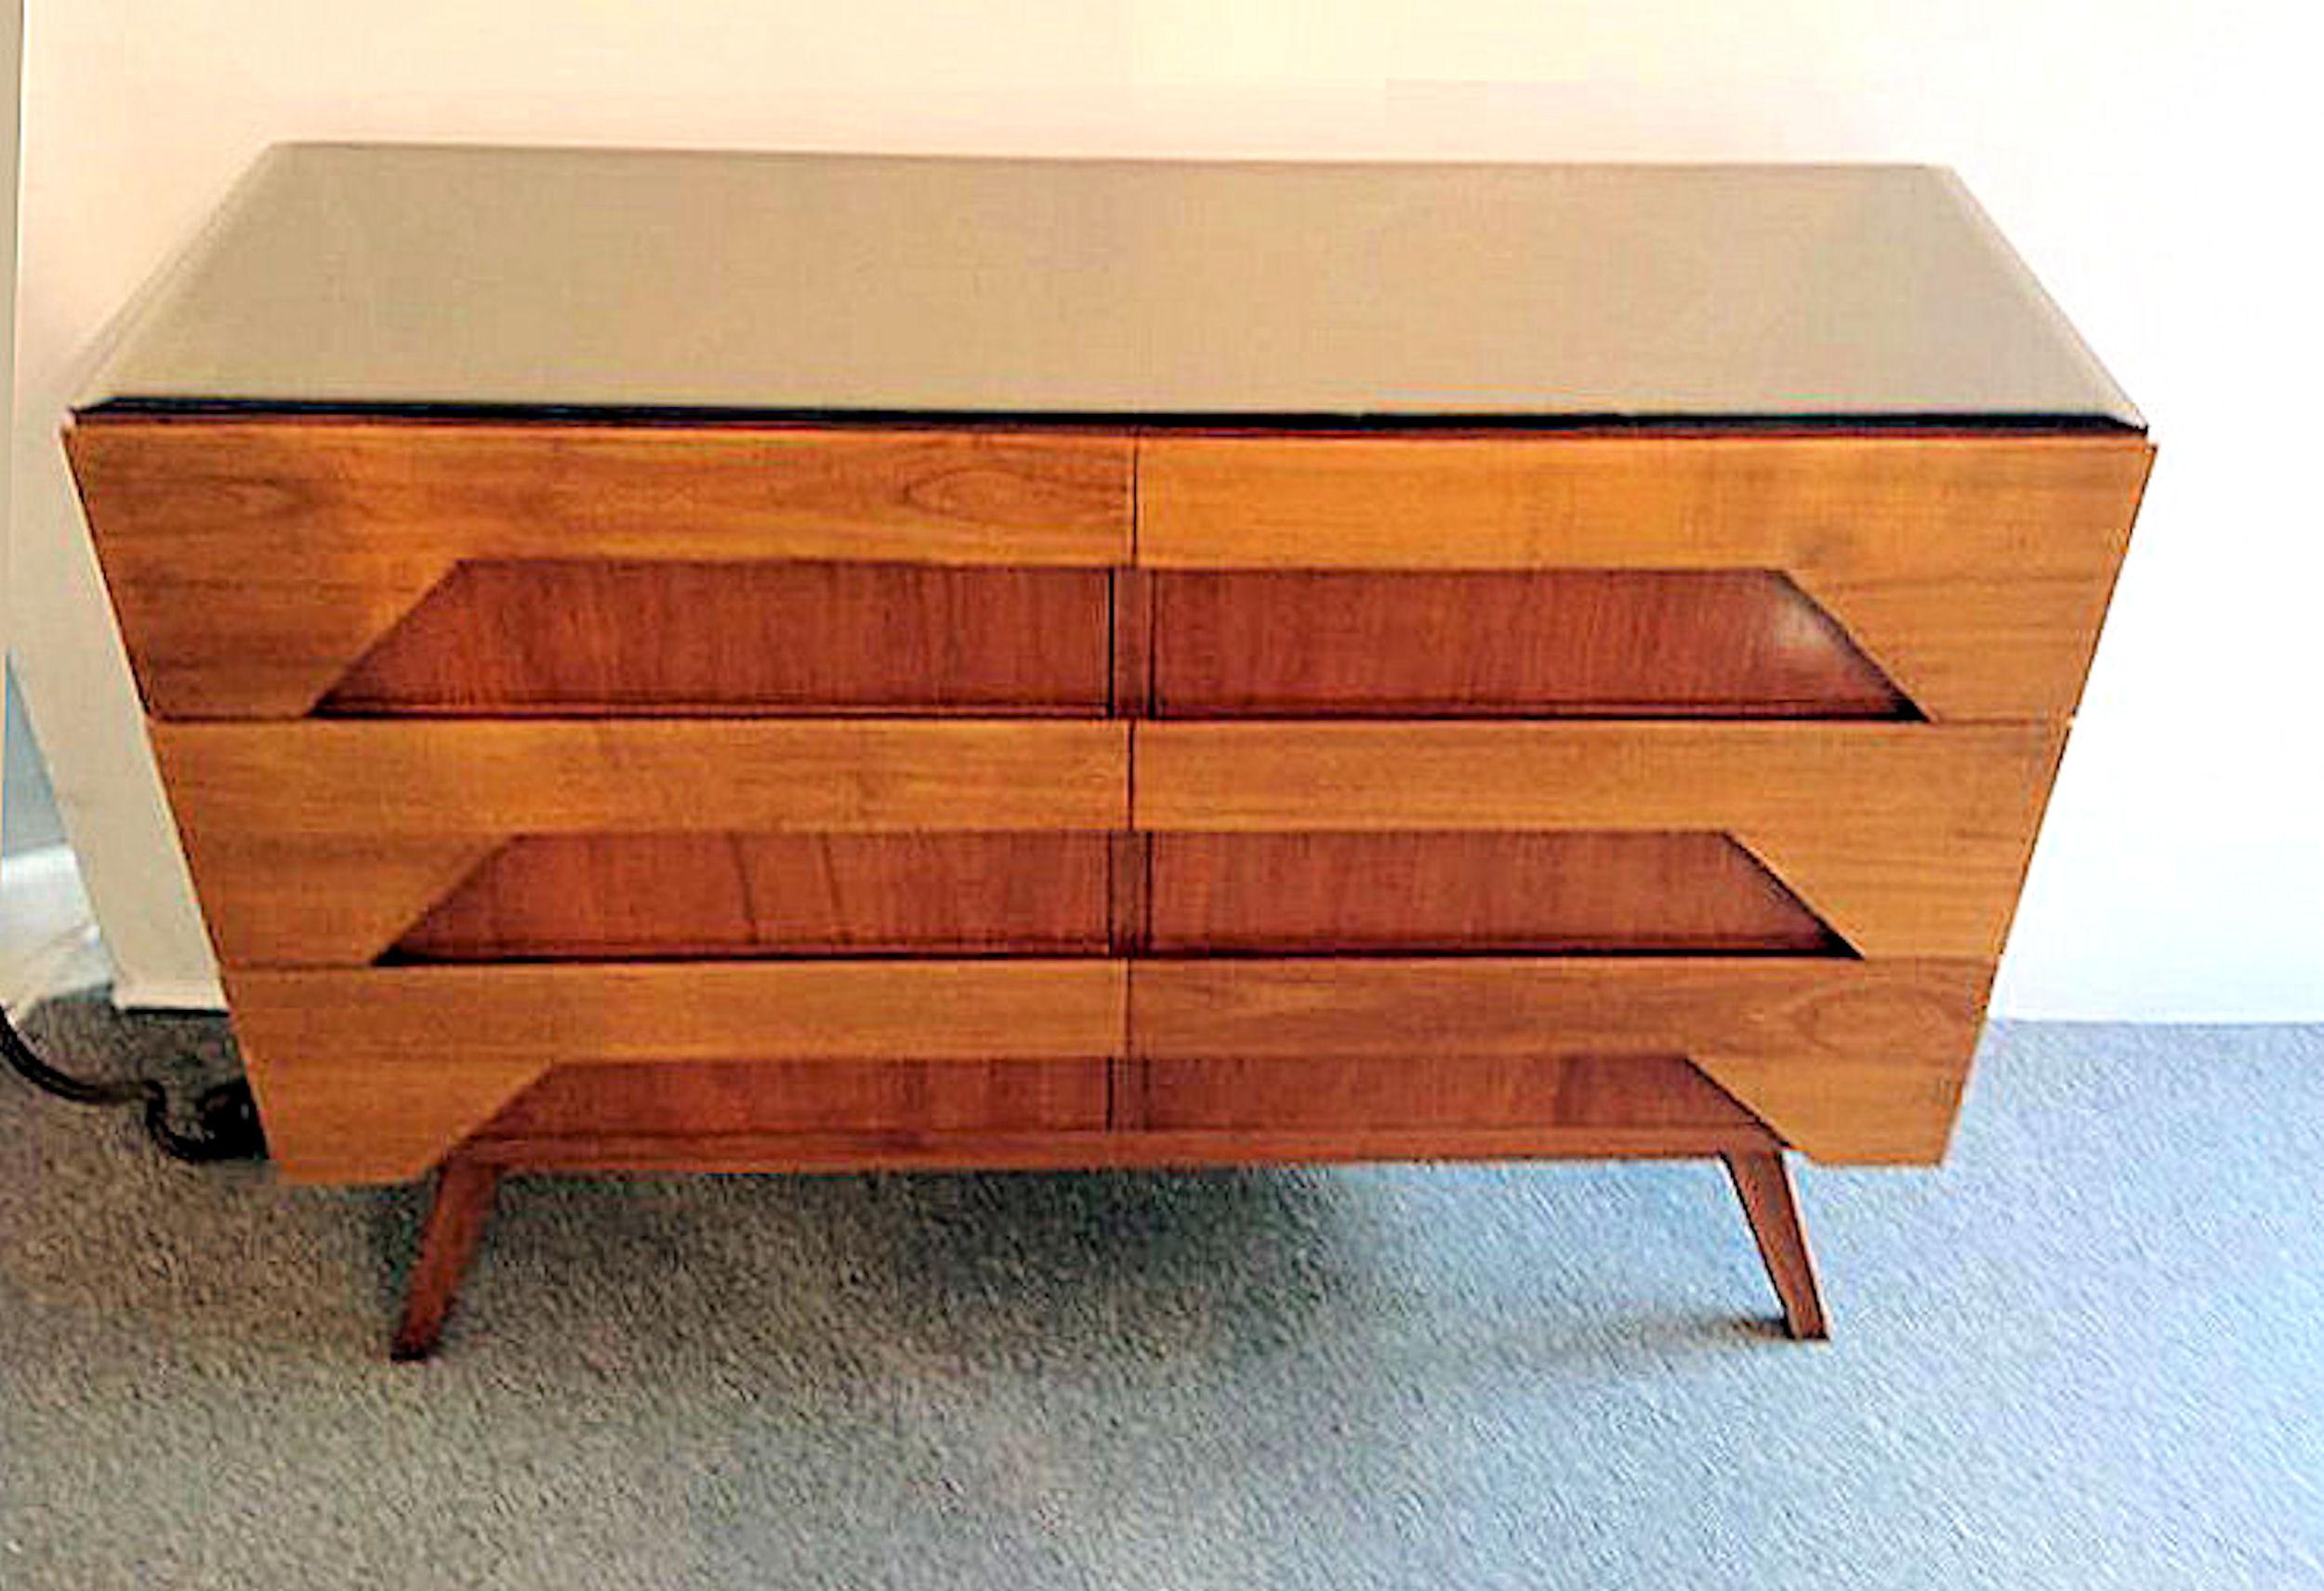 Clear and dark fruit wood Italian Mid-Century Modern chest of drawer or dresser.
Topped with a bronze colored mirror, 
The vintage Italian dresser has 6 large drawers. 
From Milano, Italy, circa 1960.
In very good condition.